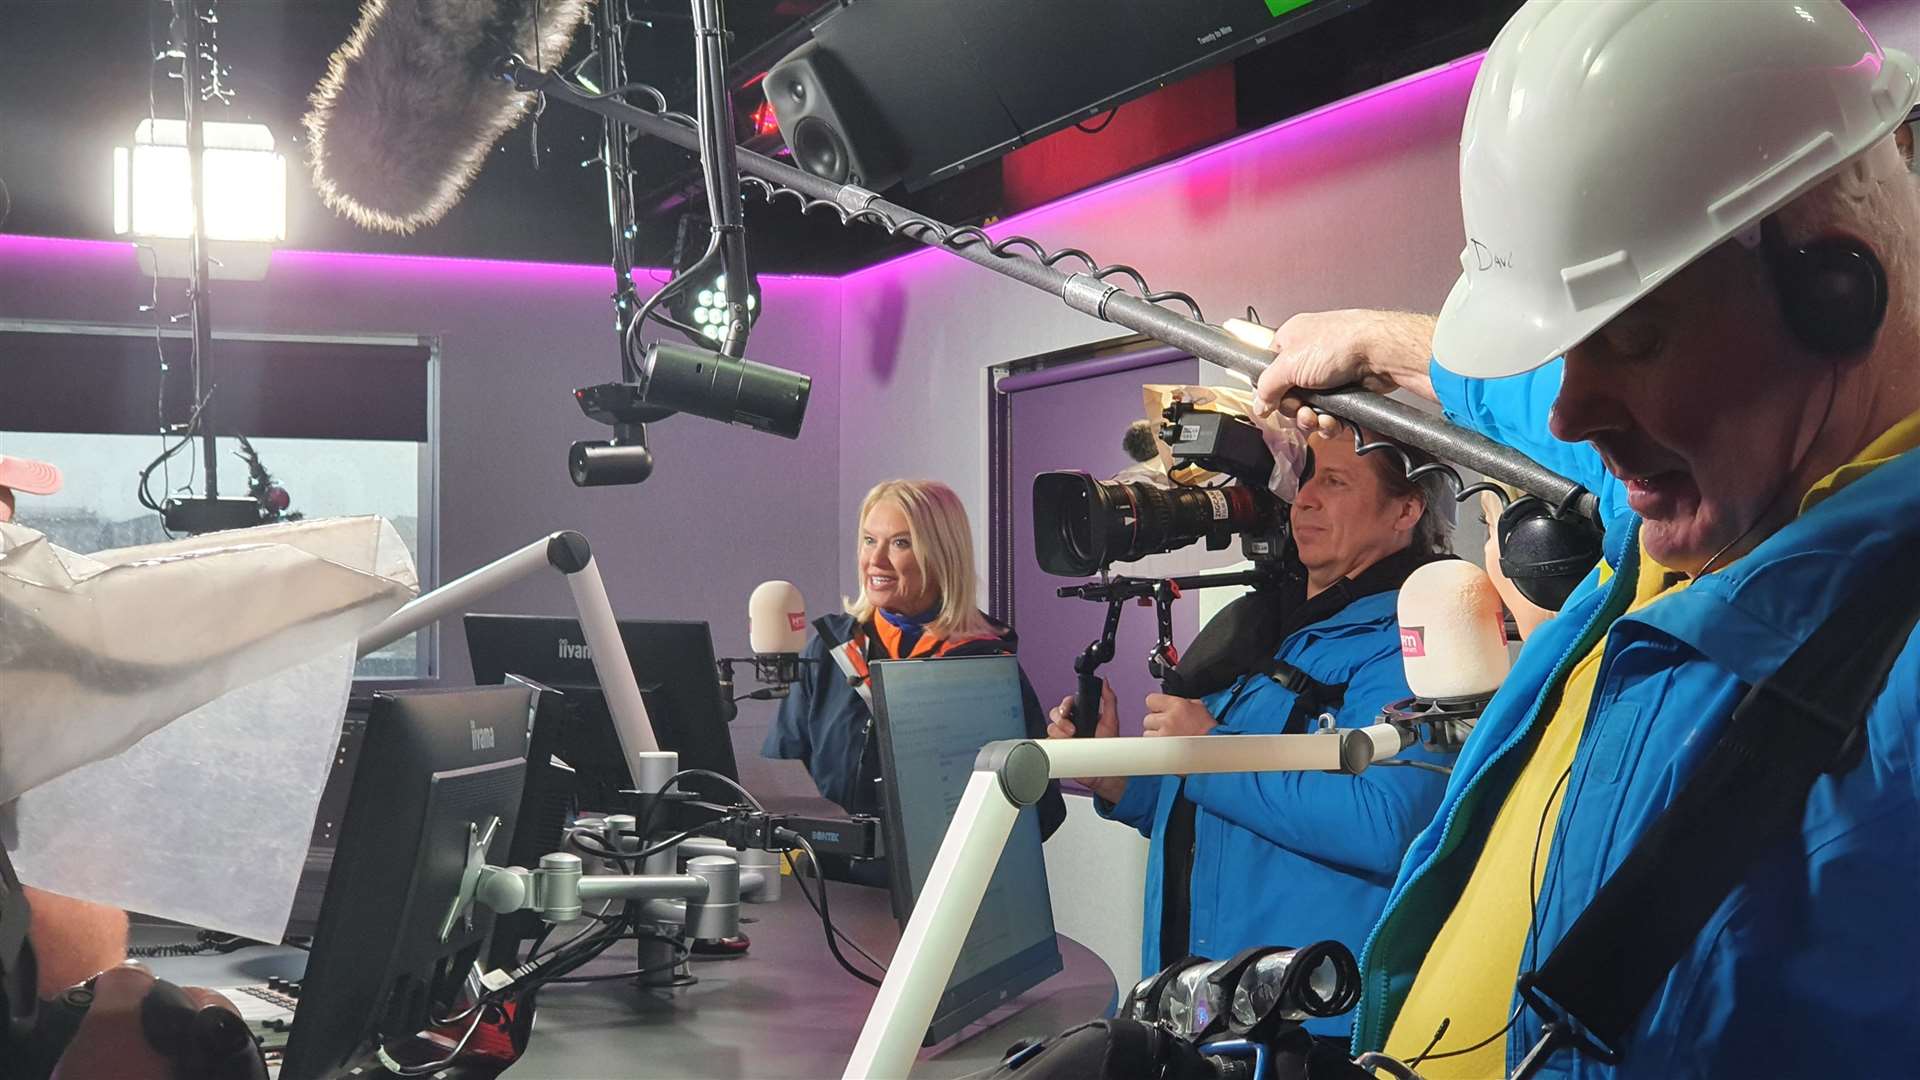 Anneka Rice visited kmfm in November to campaign for volunteers for her new episode of Challenge Anneka, filming at Foal Farm in Biggin Hill